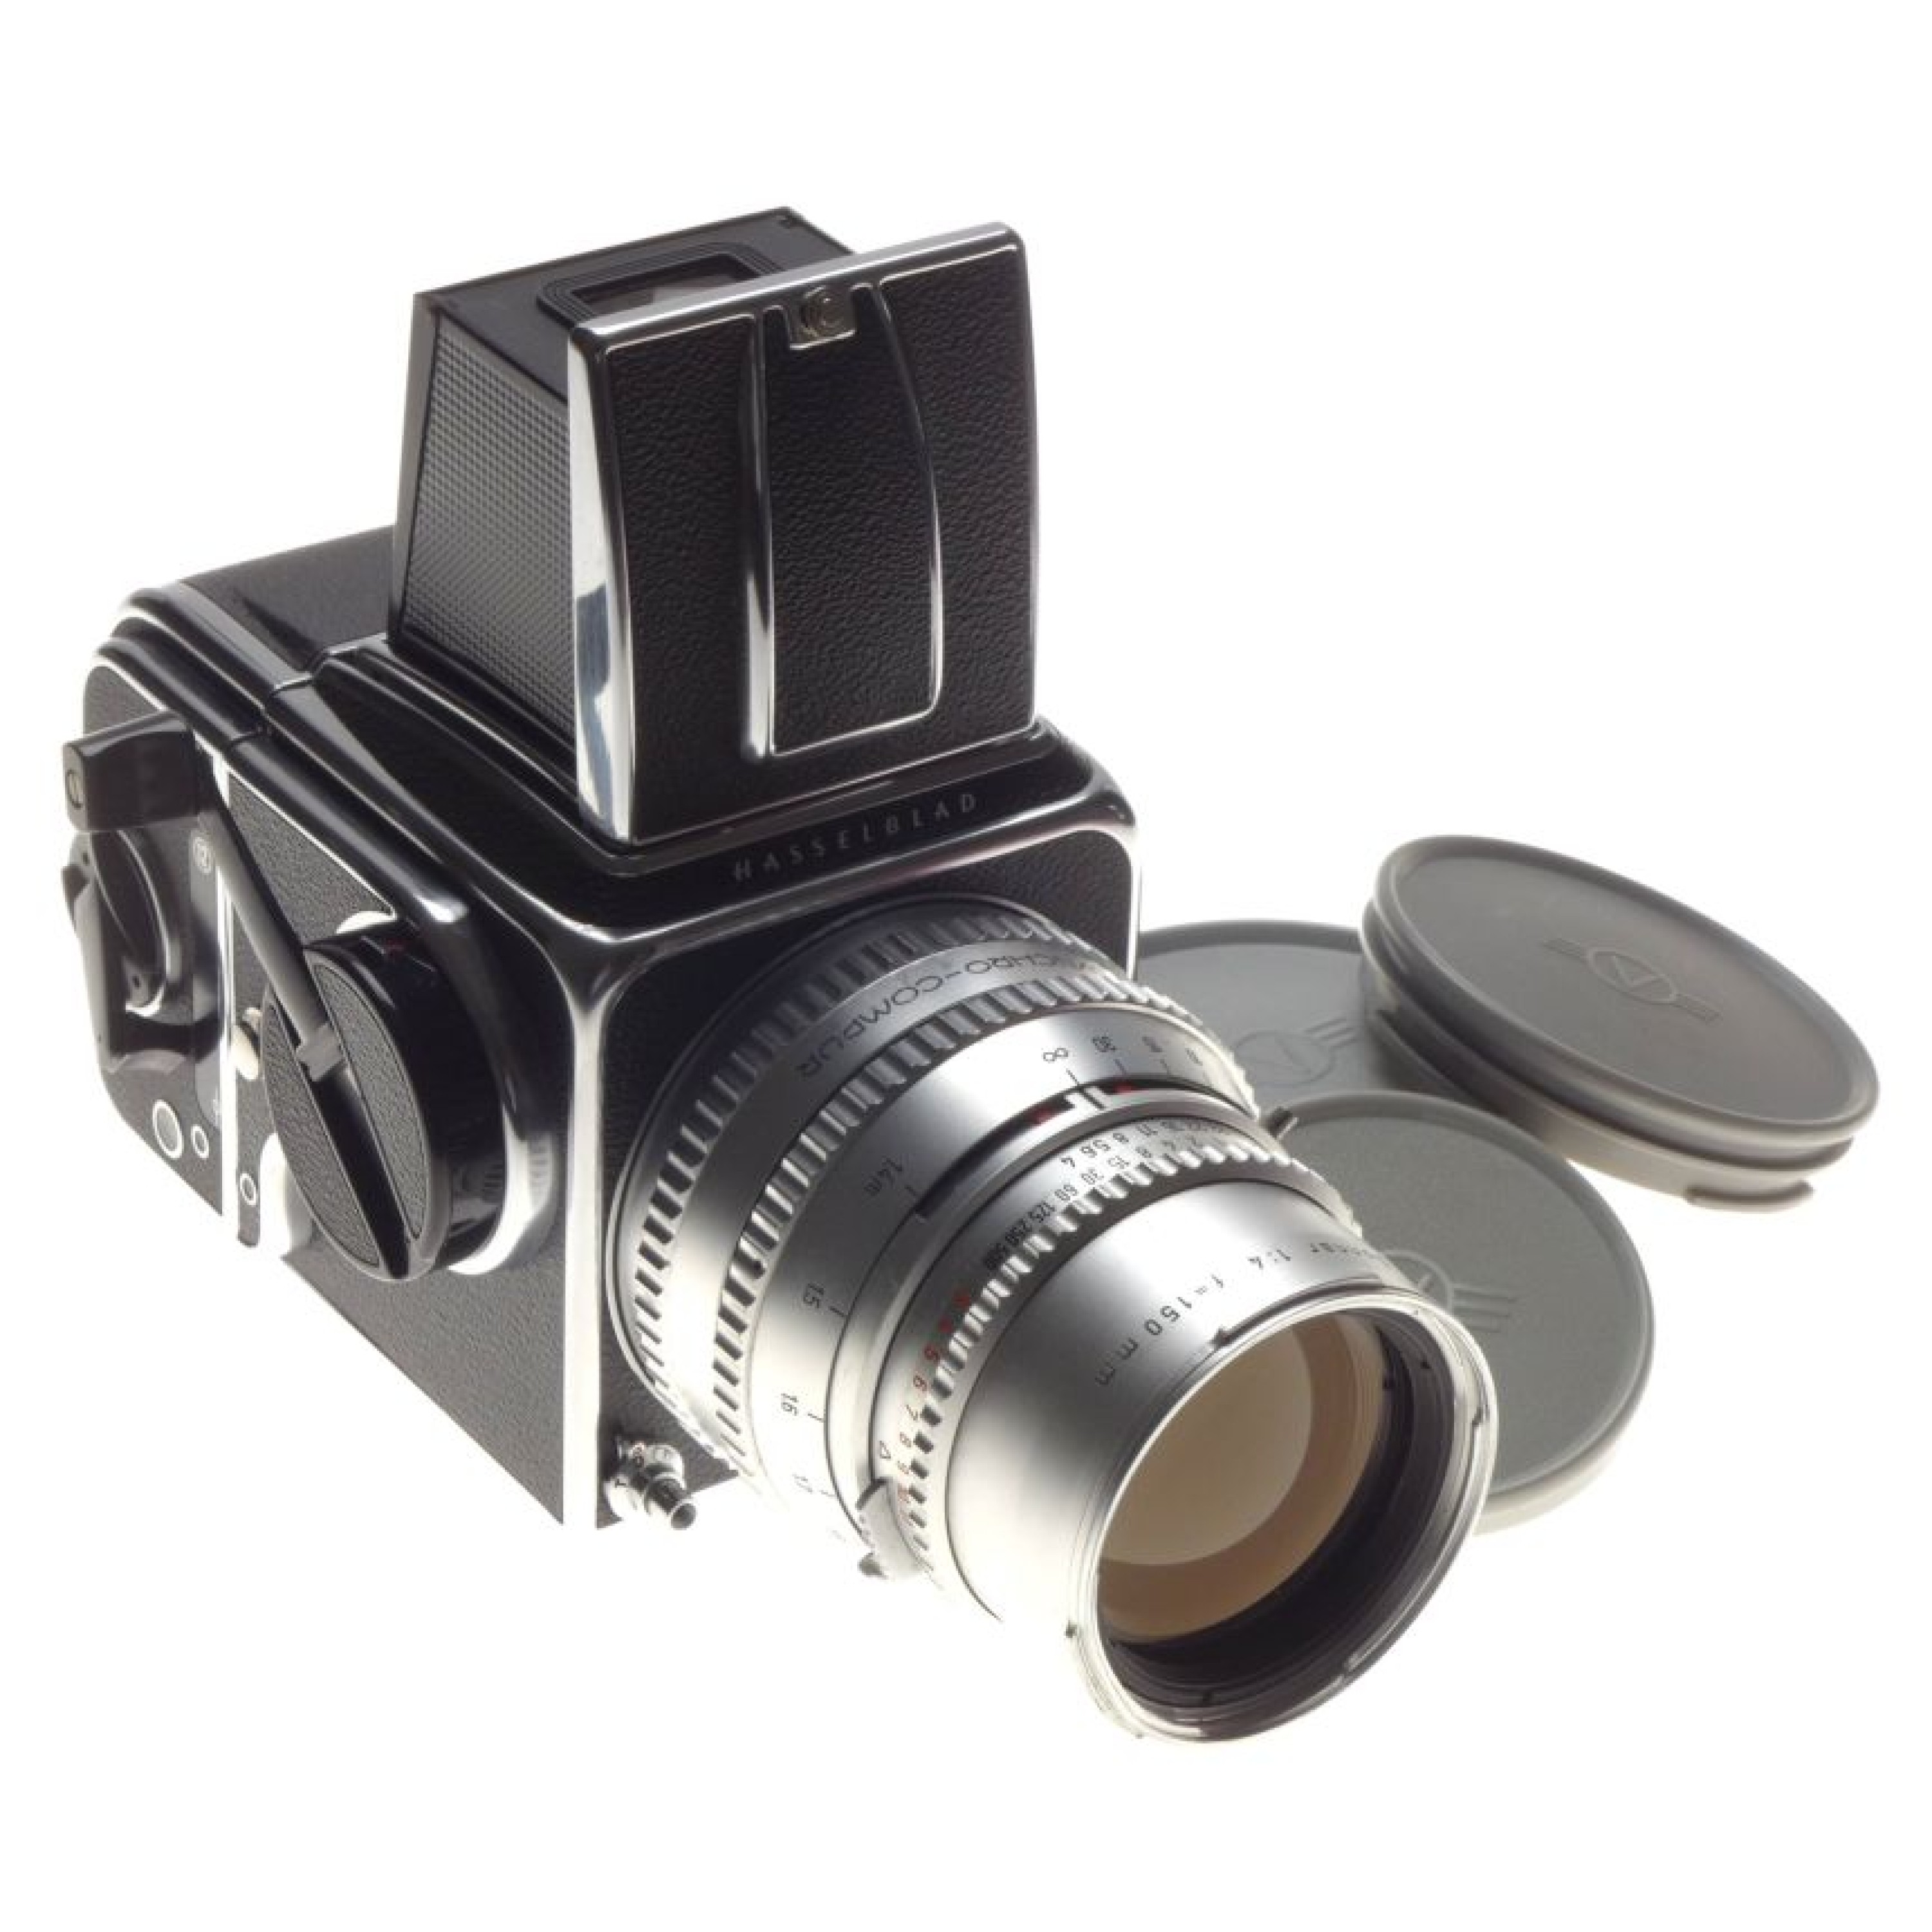 Hasselblad 500 C Chrome Body 6x6 Sonnar Zeiss 1:4 f=150mm Silver lens 4/150  WLF